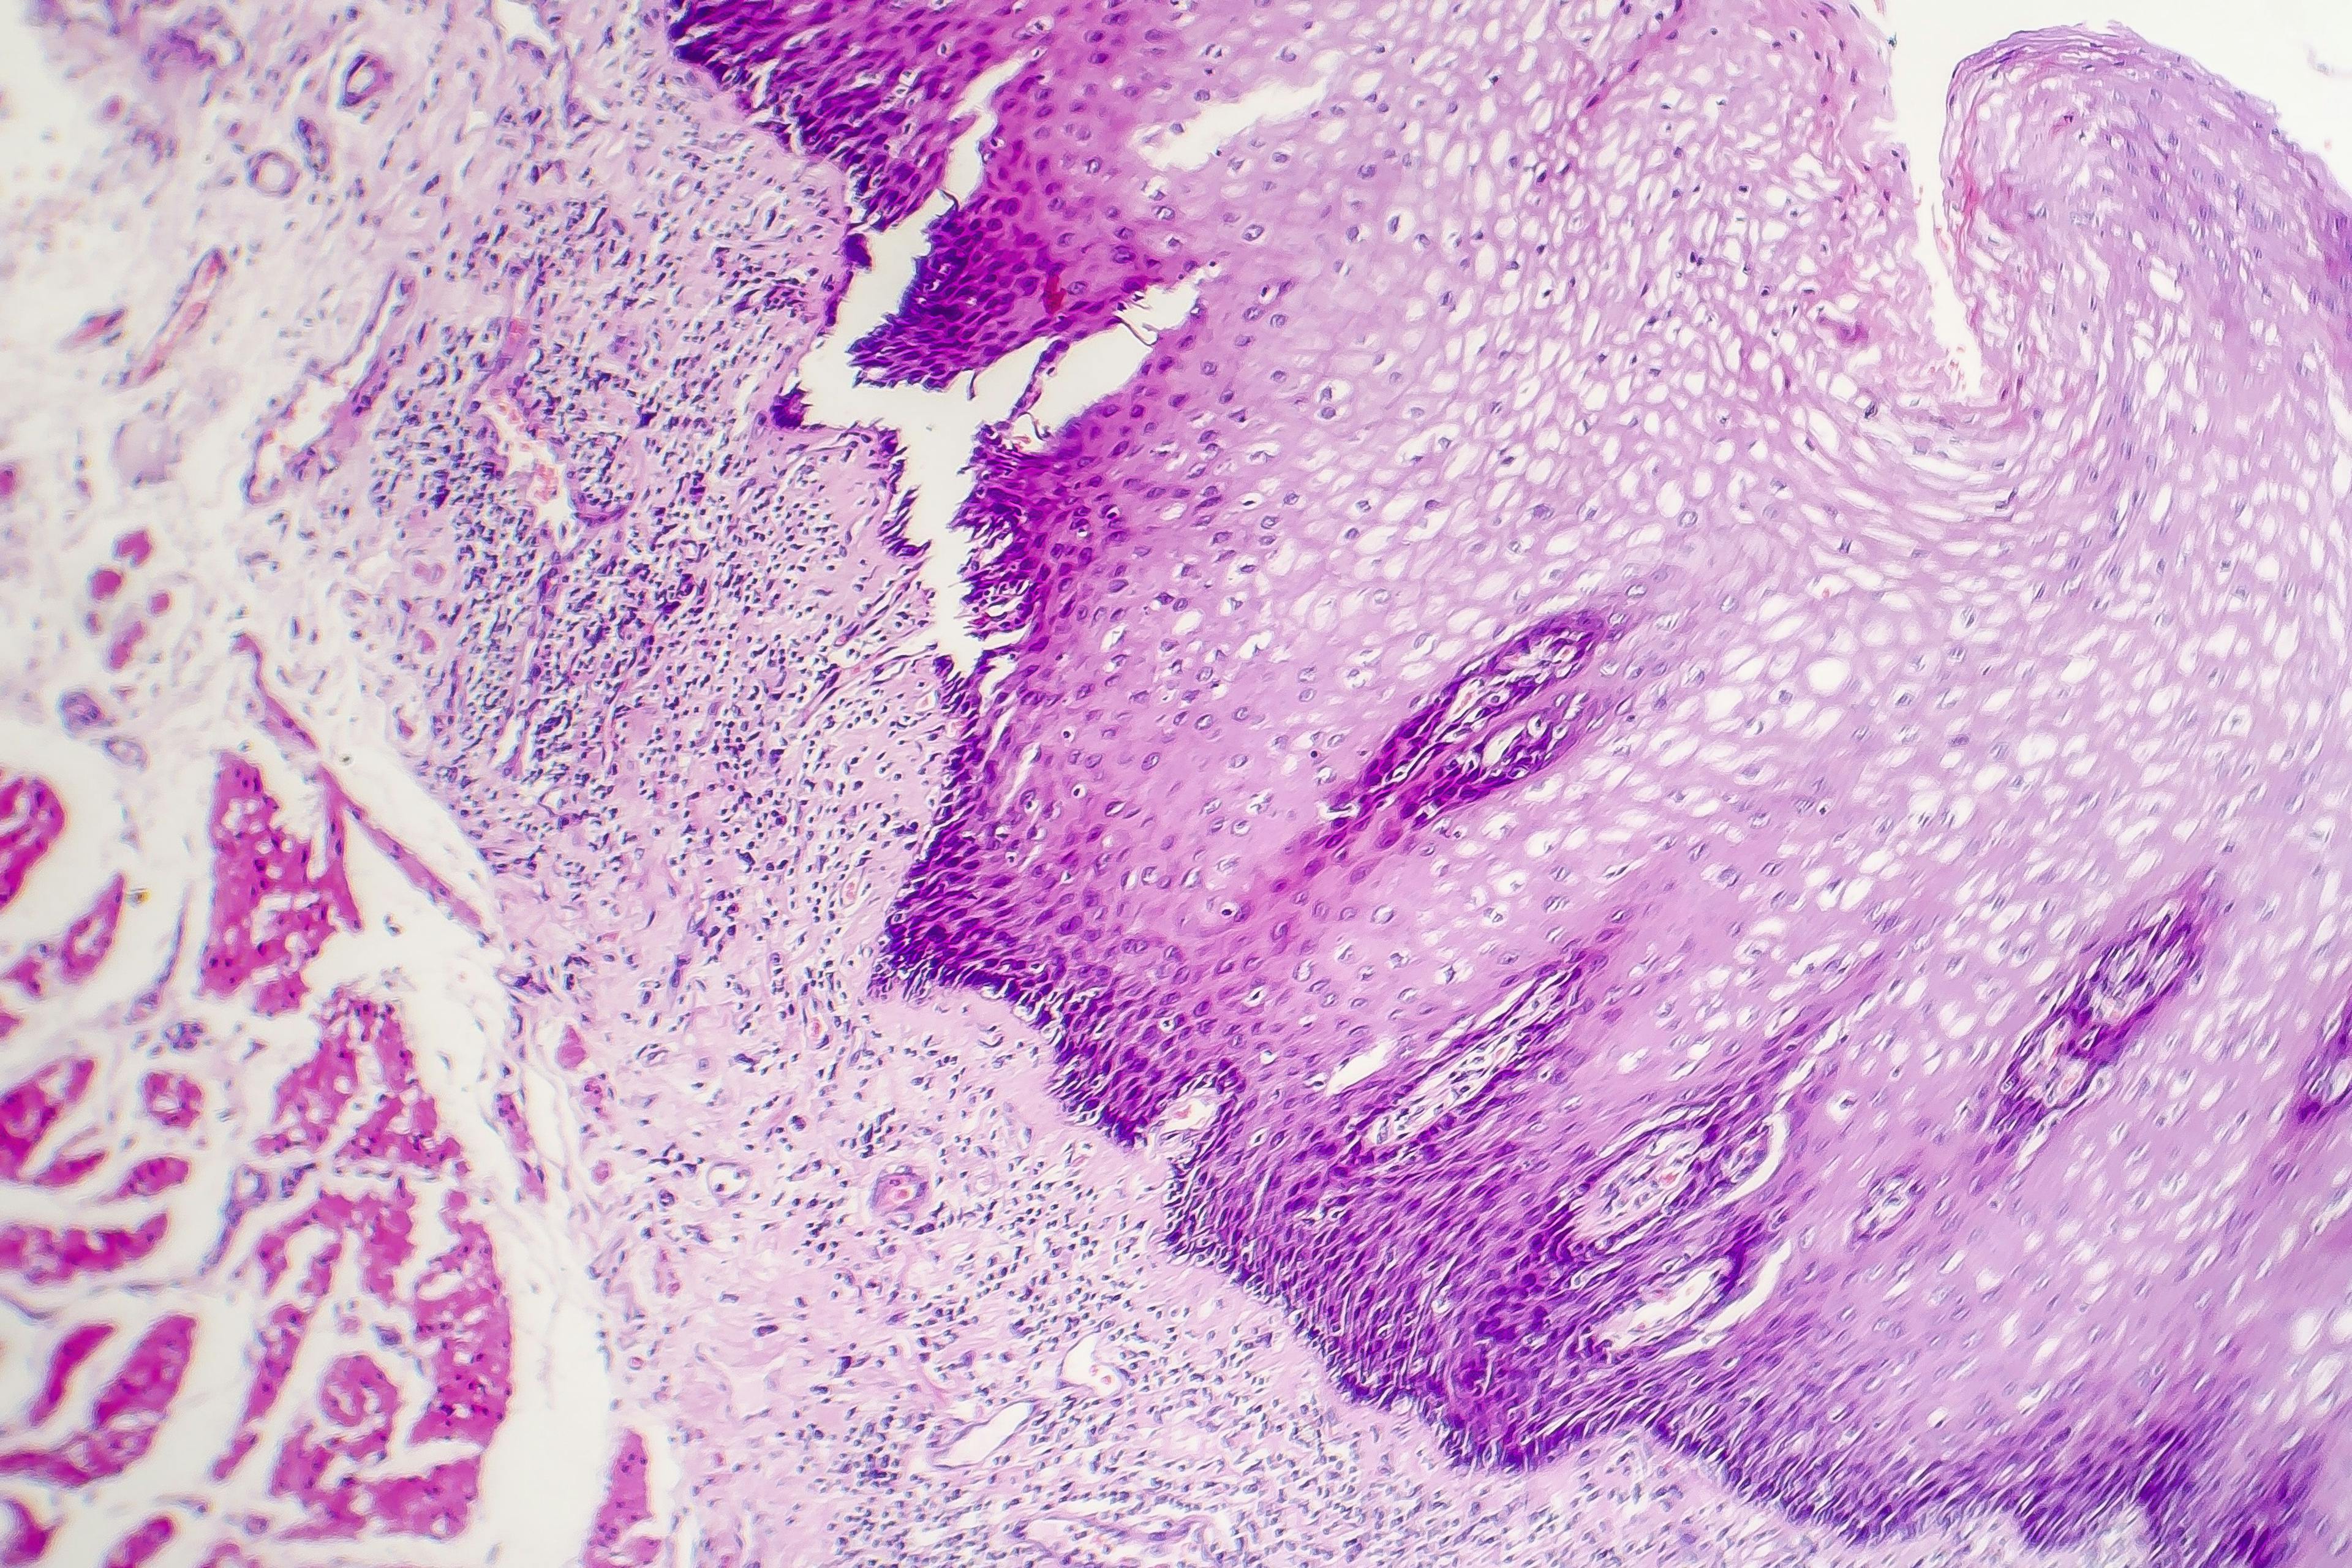 Mortality high in squamous cell carcinoma in hidradenitis suppurativa